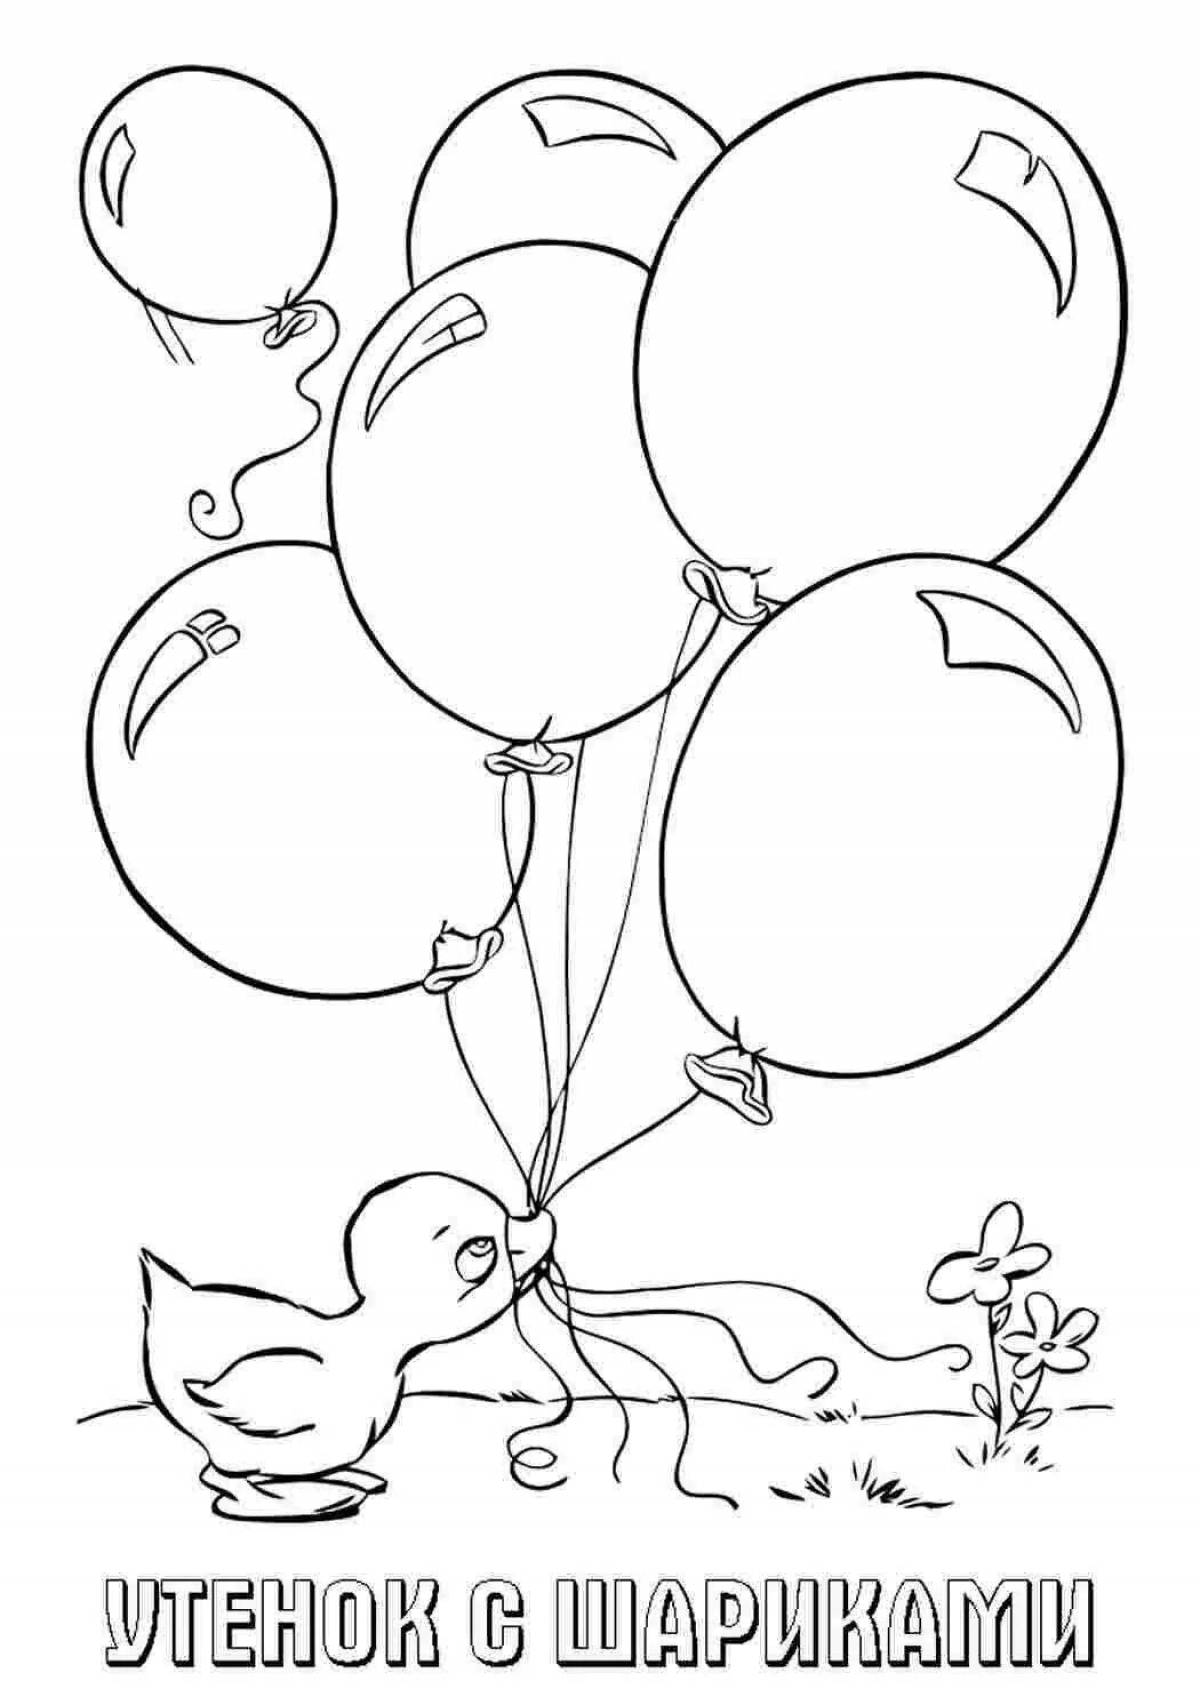 Coloring book with glowing balloons for kids